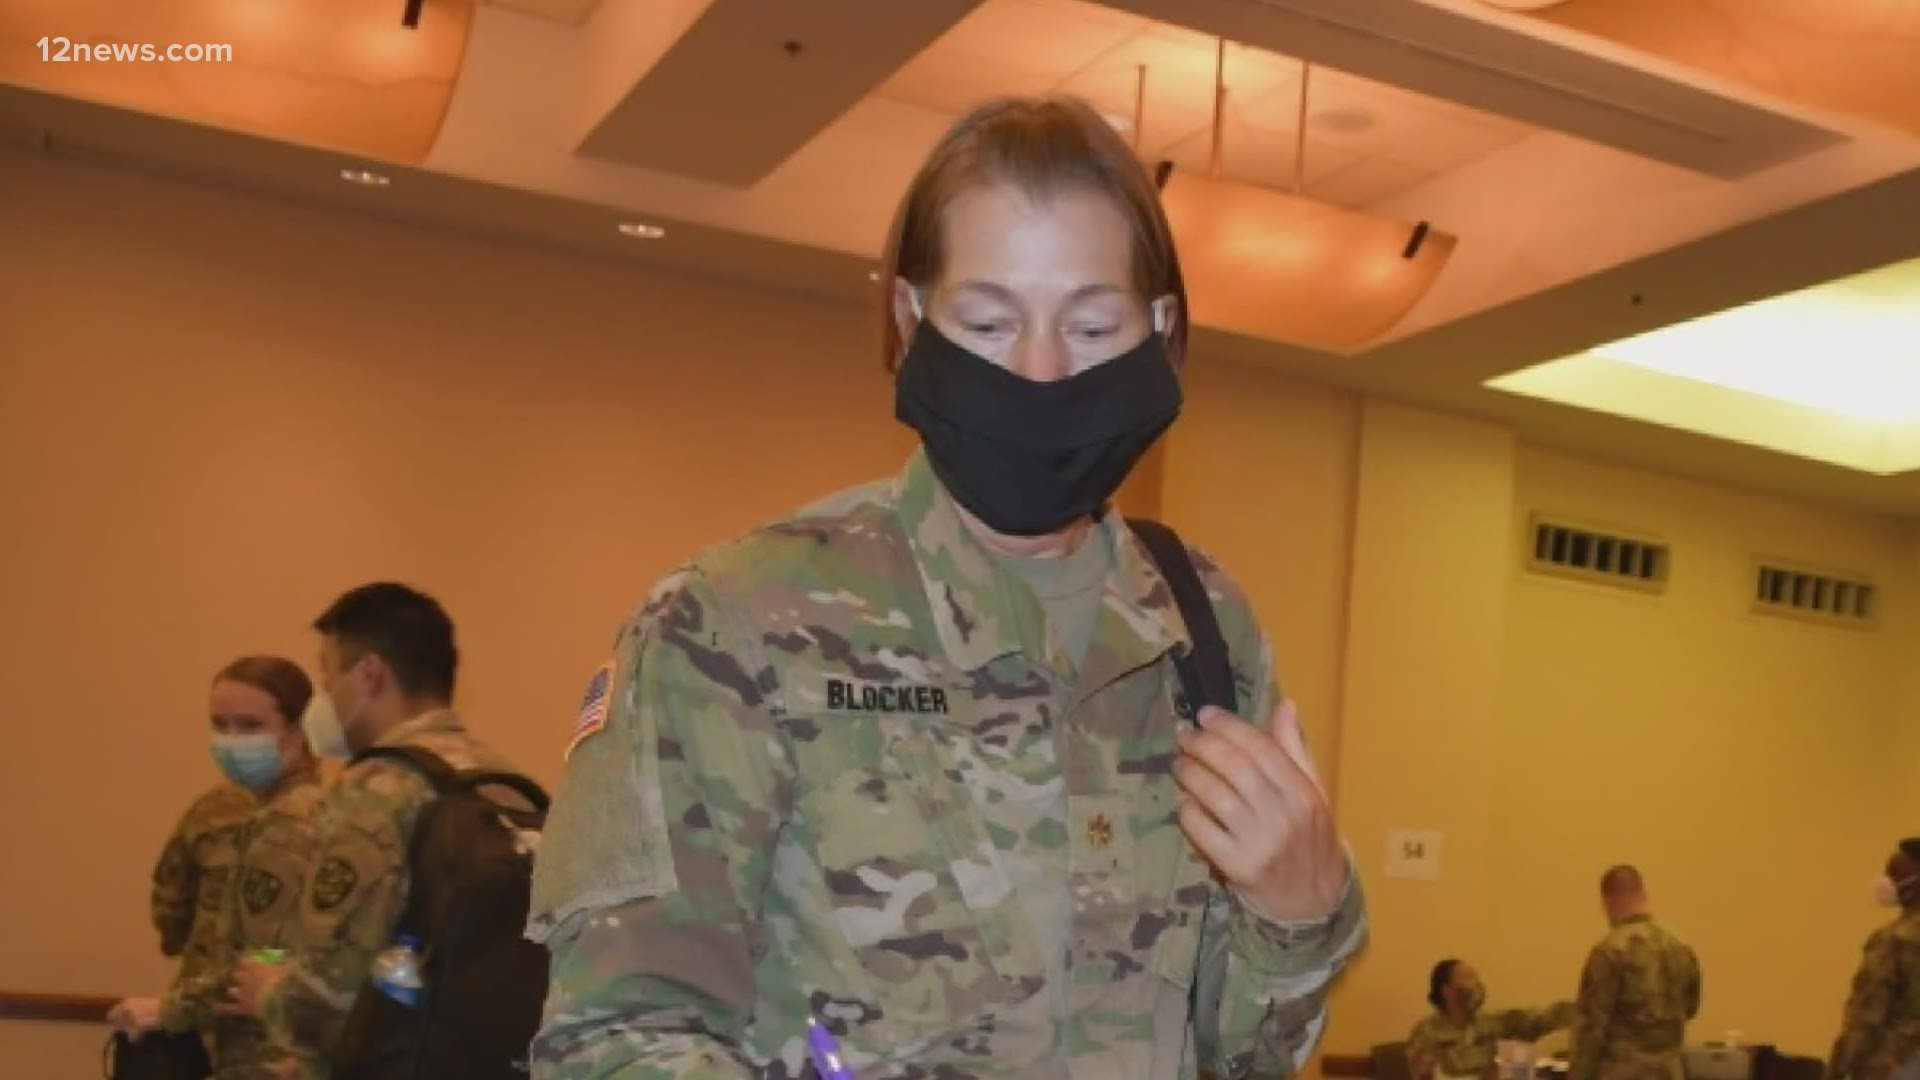 A group of Arizona Army reserve nurses have been deployed around the country to fight the COVID-19 battle. It's a call of duty that runs deep for them all.